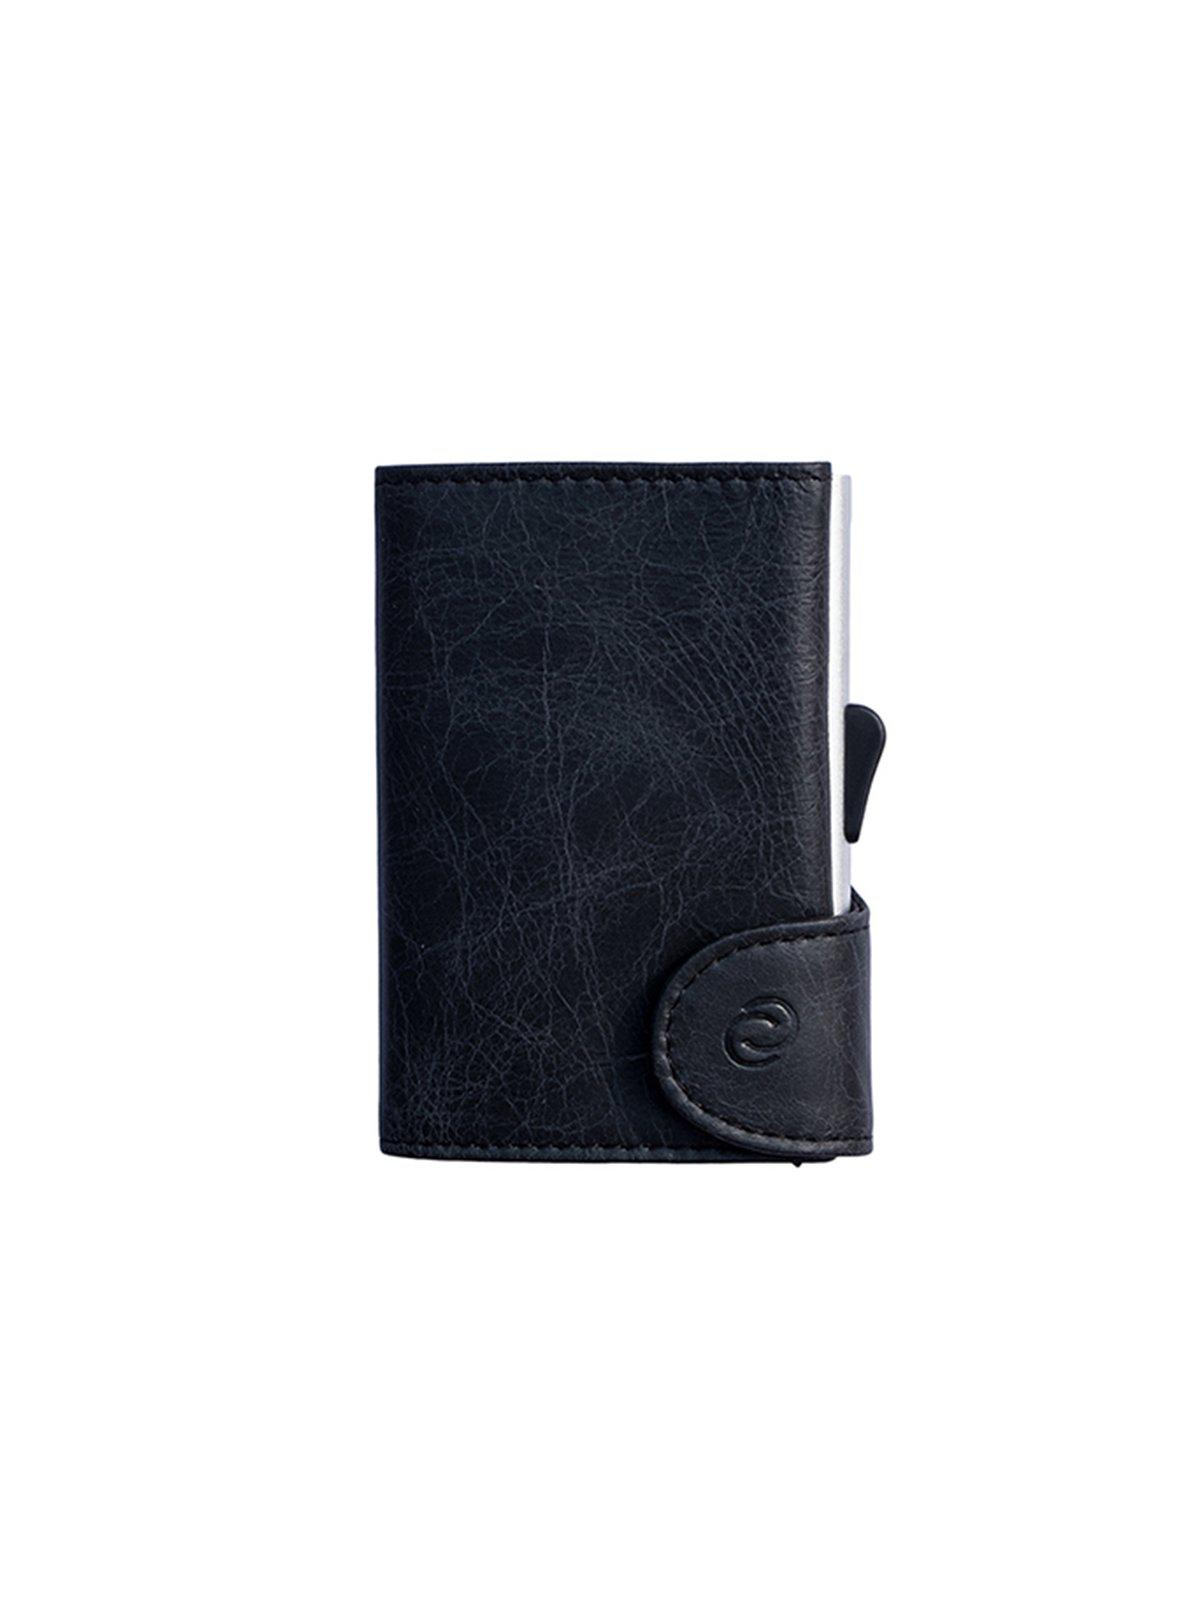 C-Secure Italian Leather RFID Wallet Blackwood - MORE by Morello Indonesia